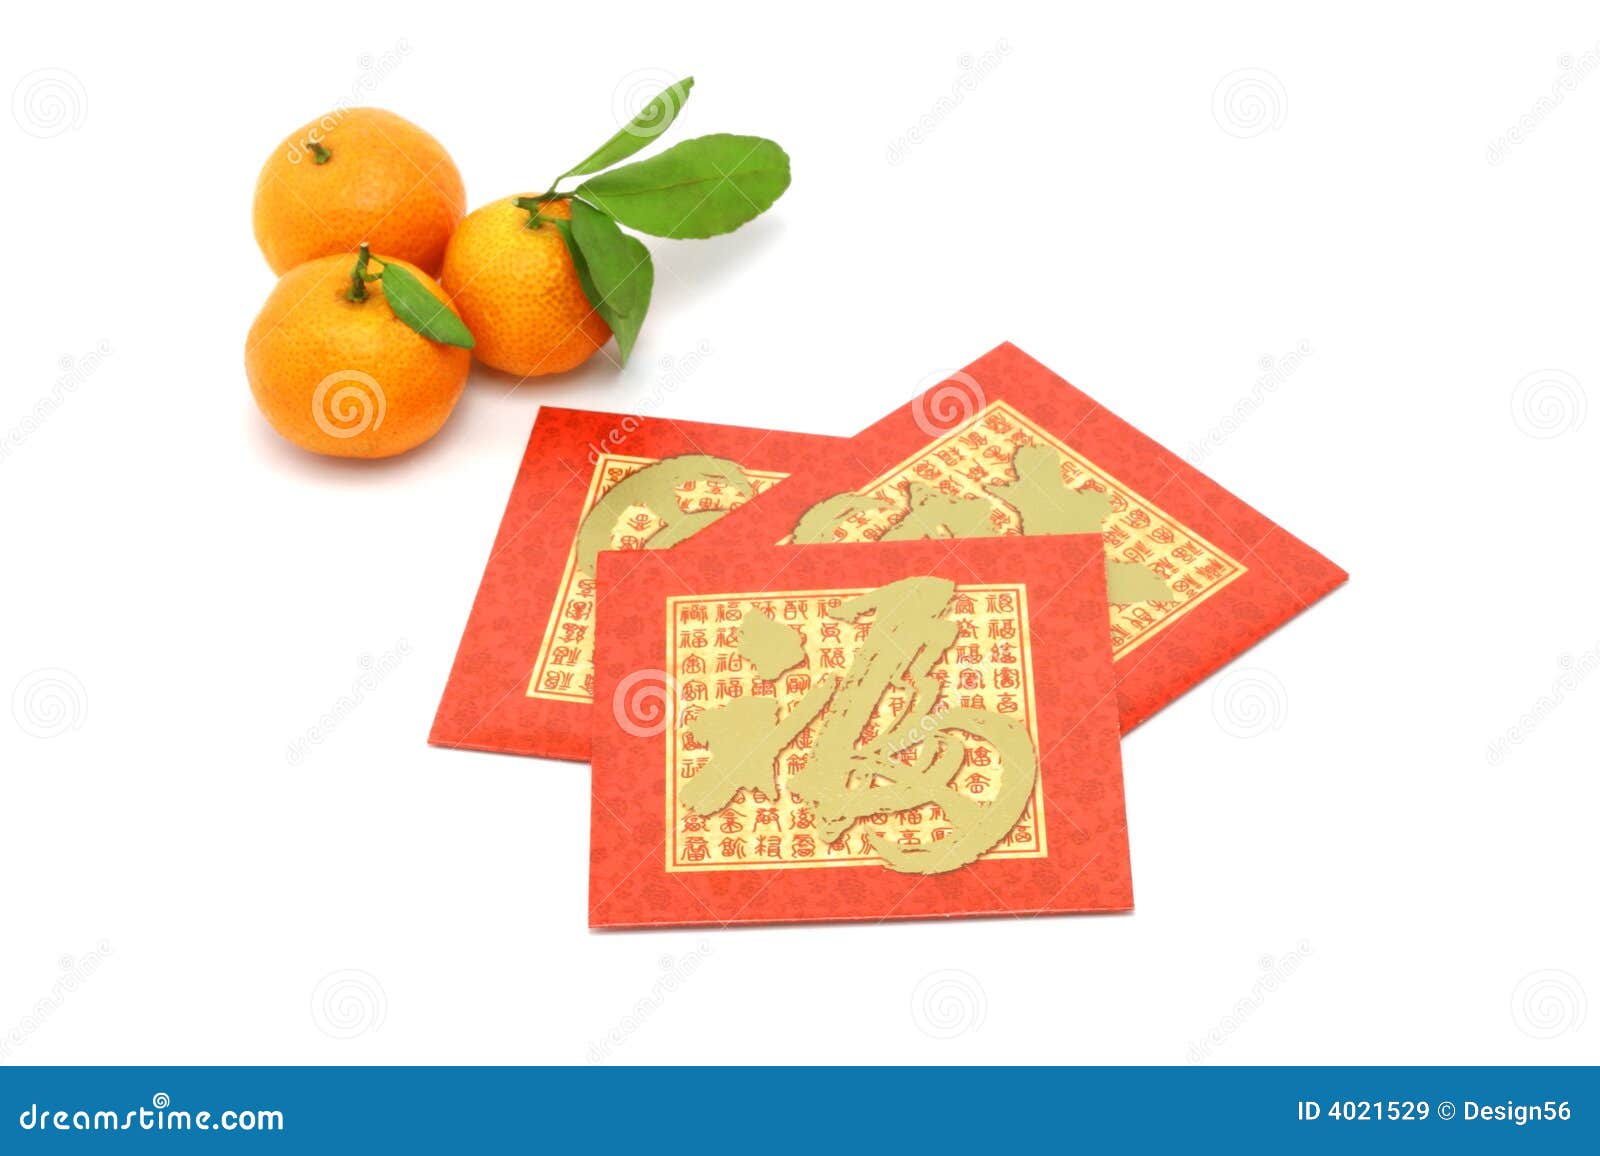 chinese new year mandarin oranges and red packets